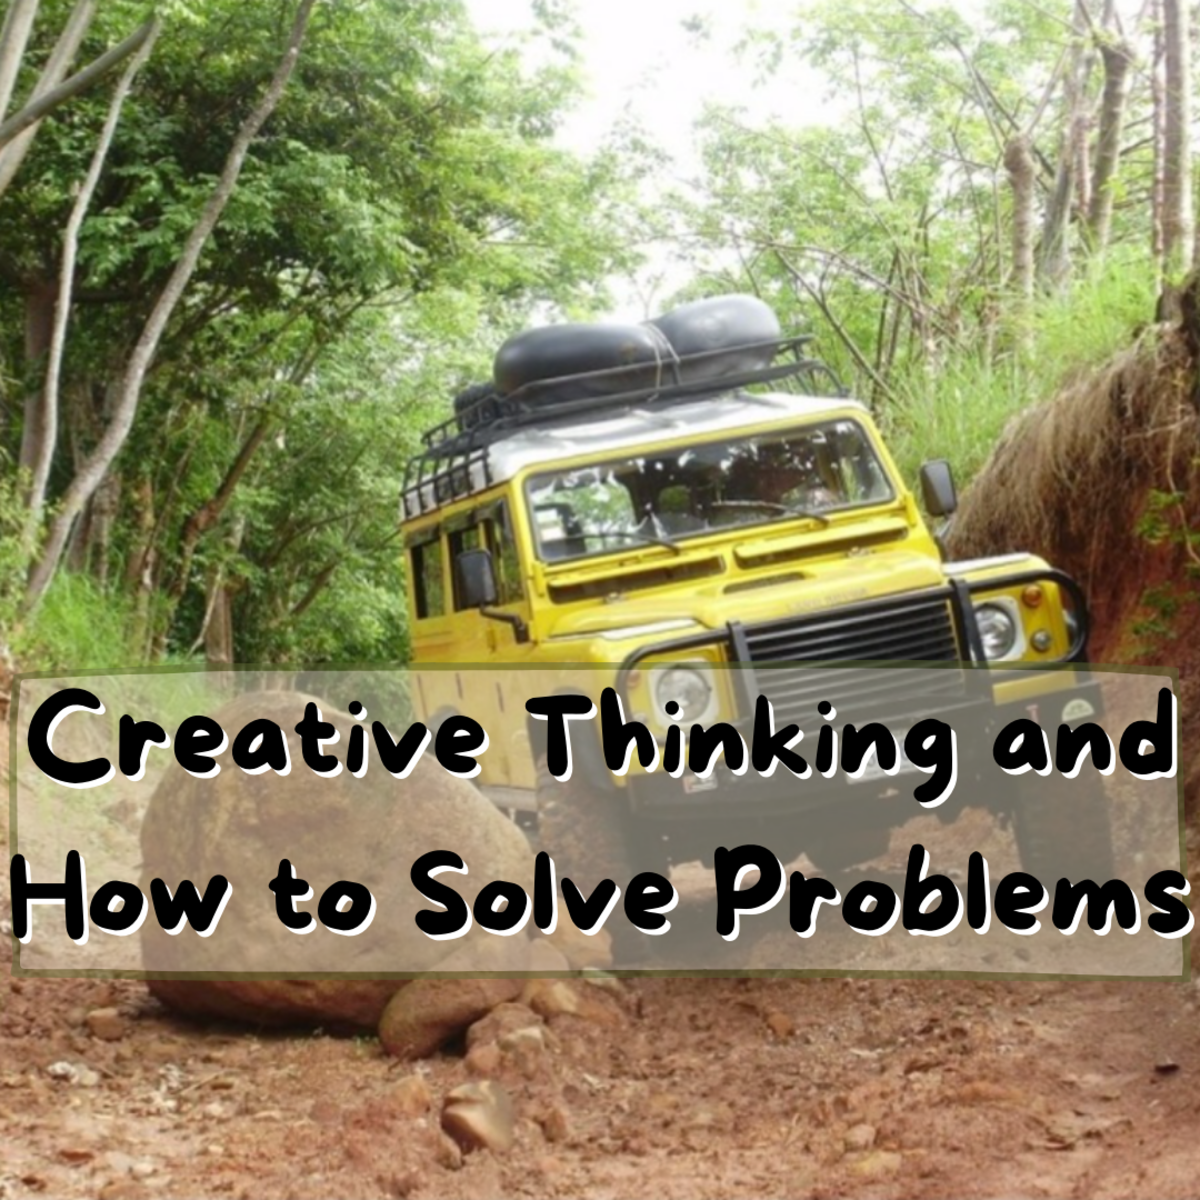 Creative Thinking and How to Solve Problems